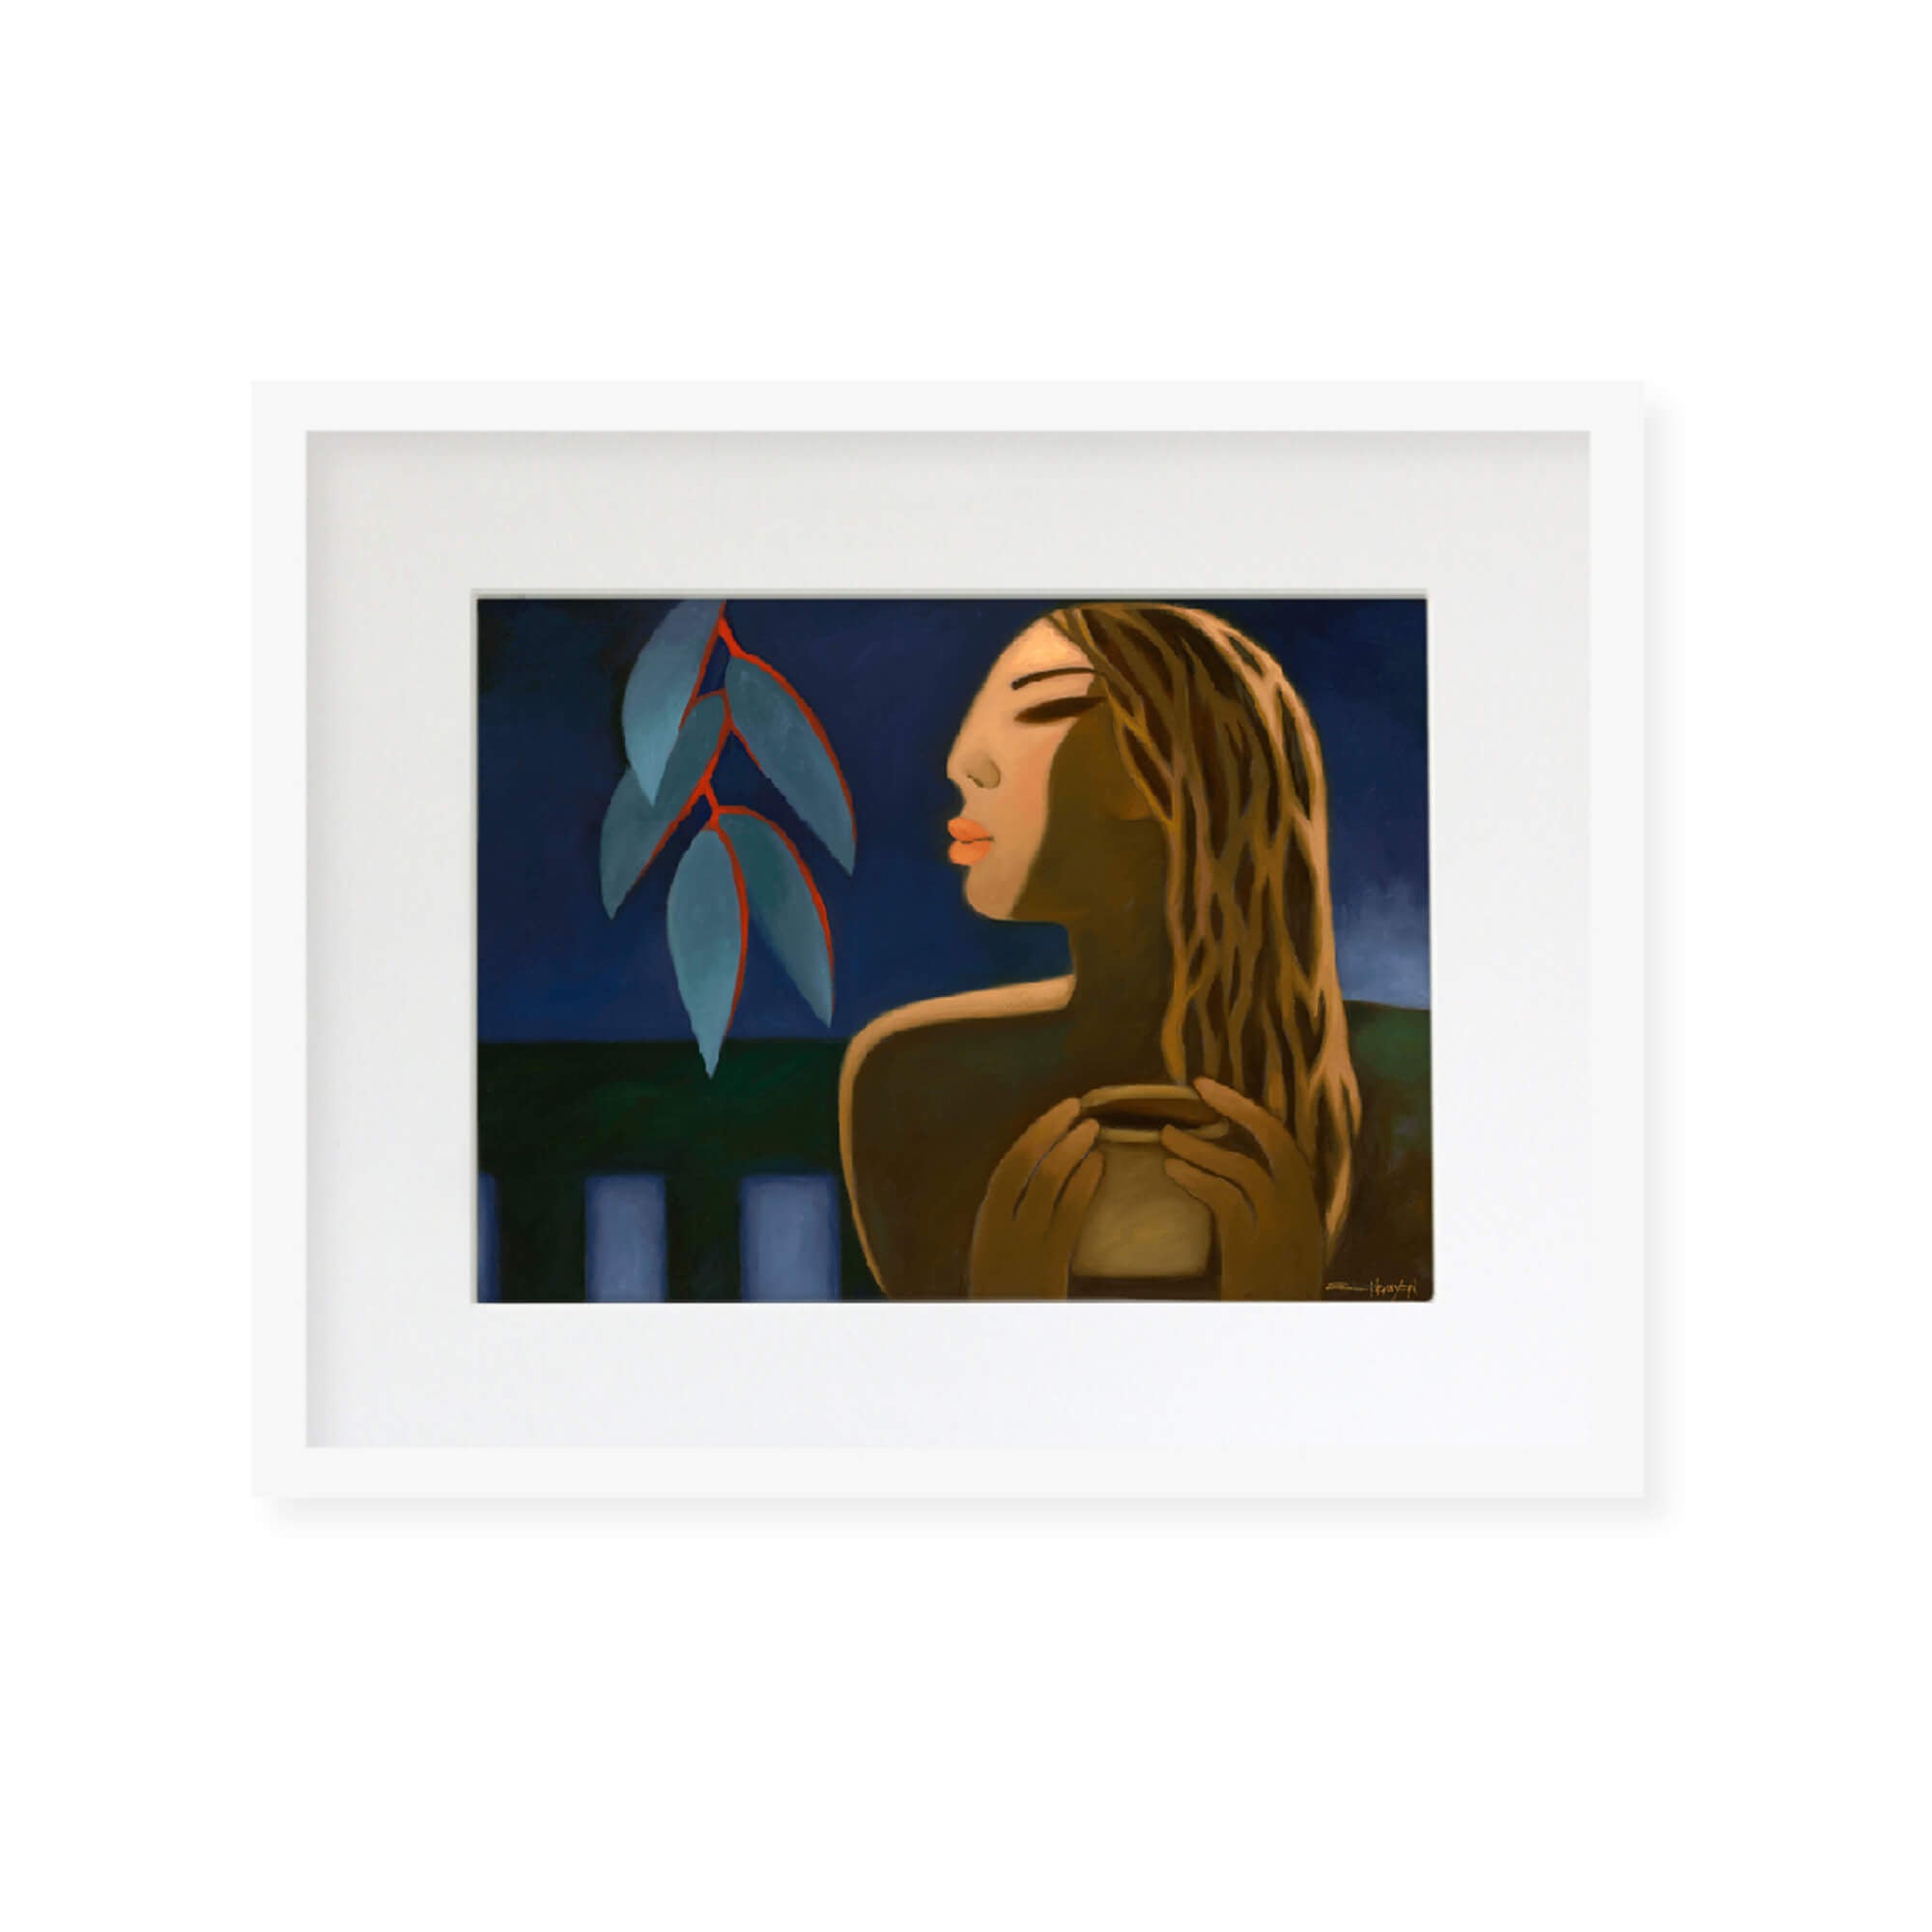 Framed matted art print of a woman drinking her cut of coffee by Hawaii artist Tim Nguyen